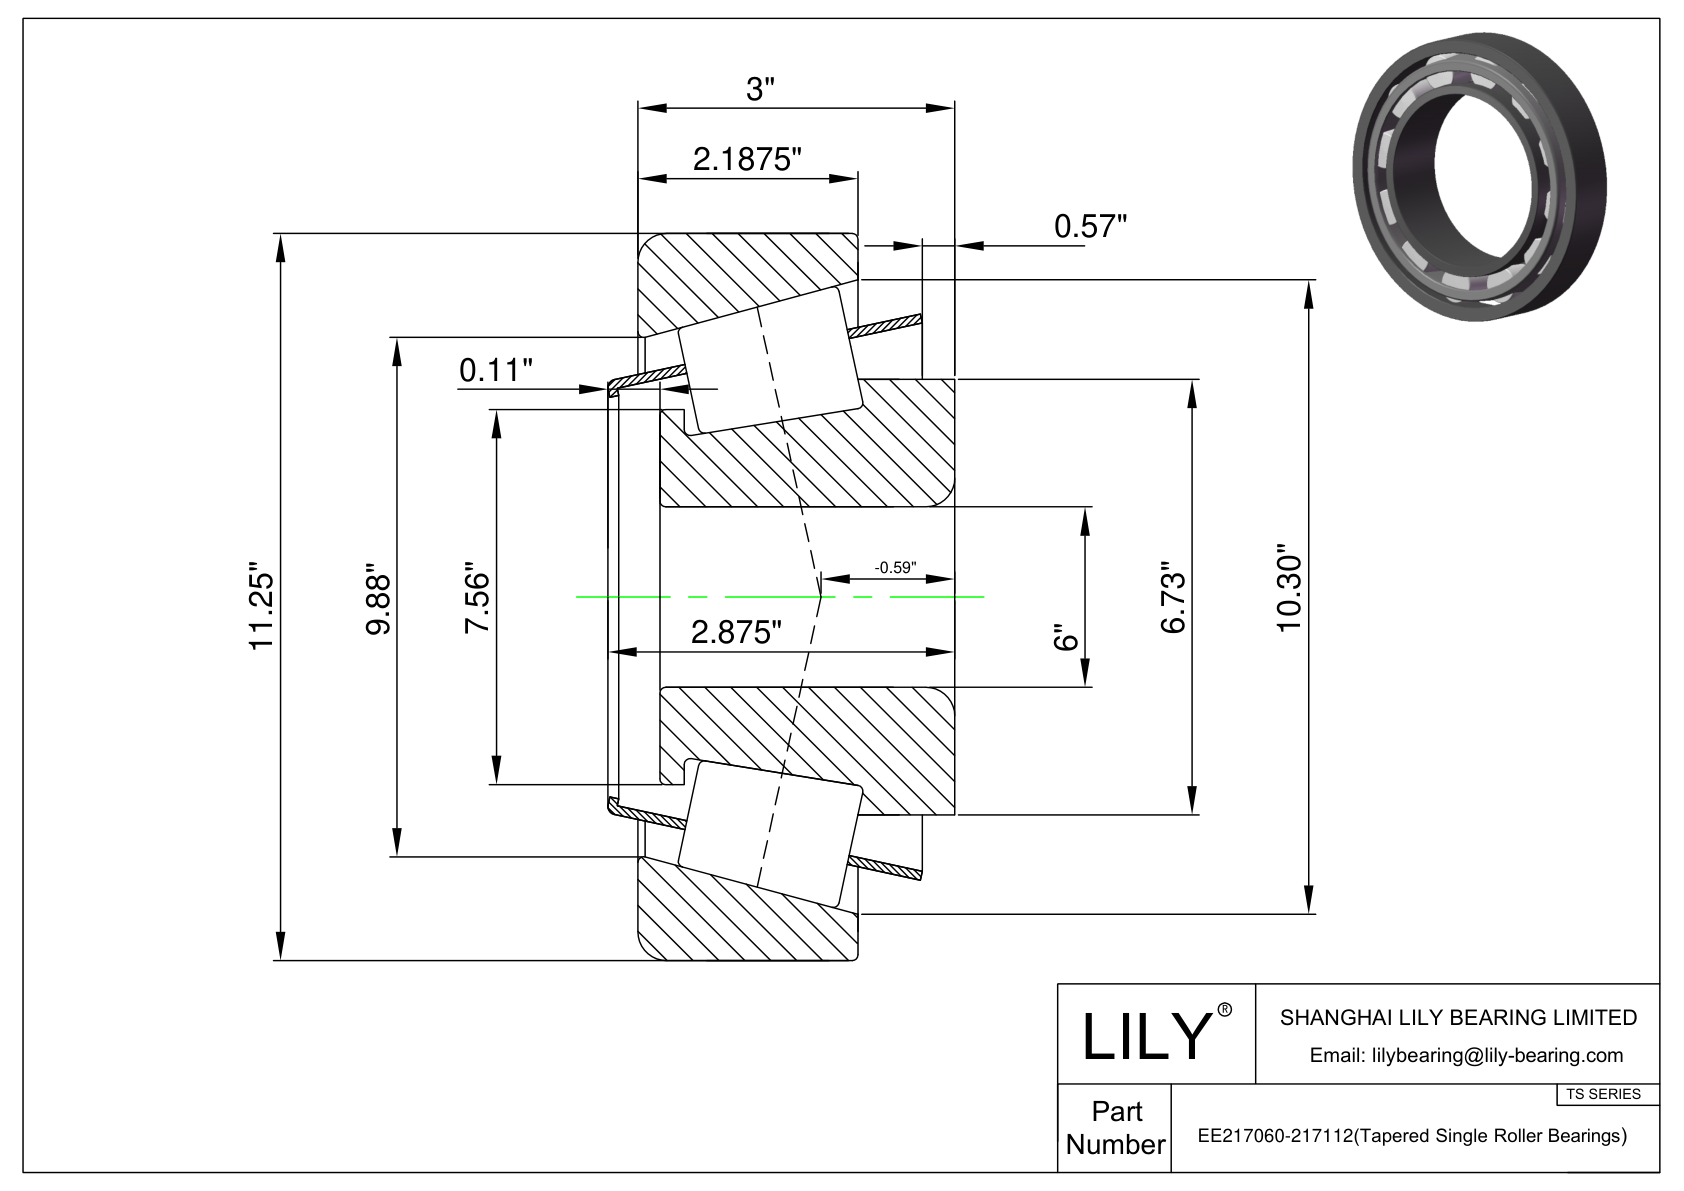 EE217060-217112 TS (Tapered Single Roller Bearings) (Imperial) cad drawing